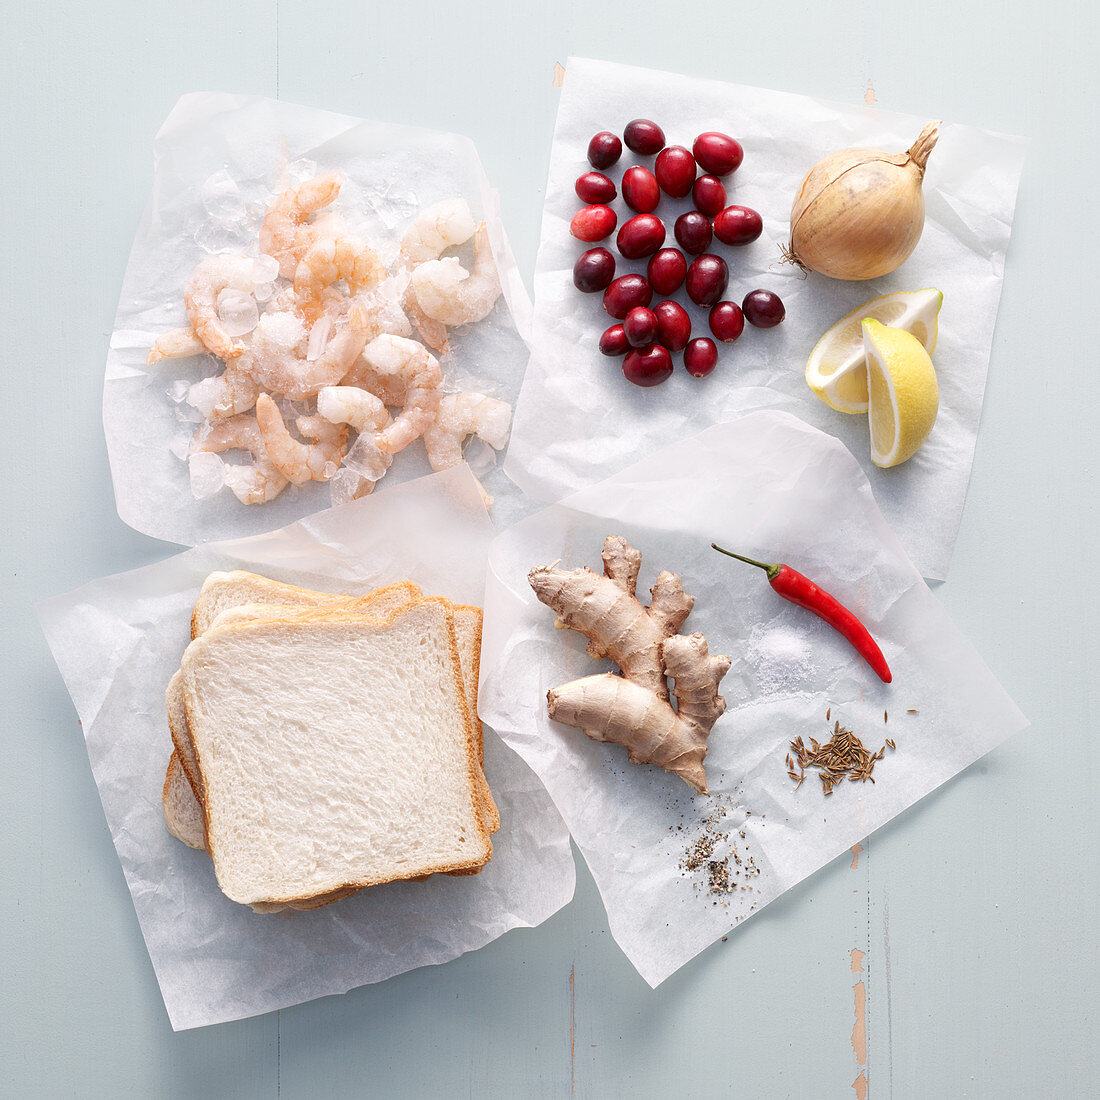 Ingredients for shrimp bread with cranberry chutney